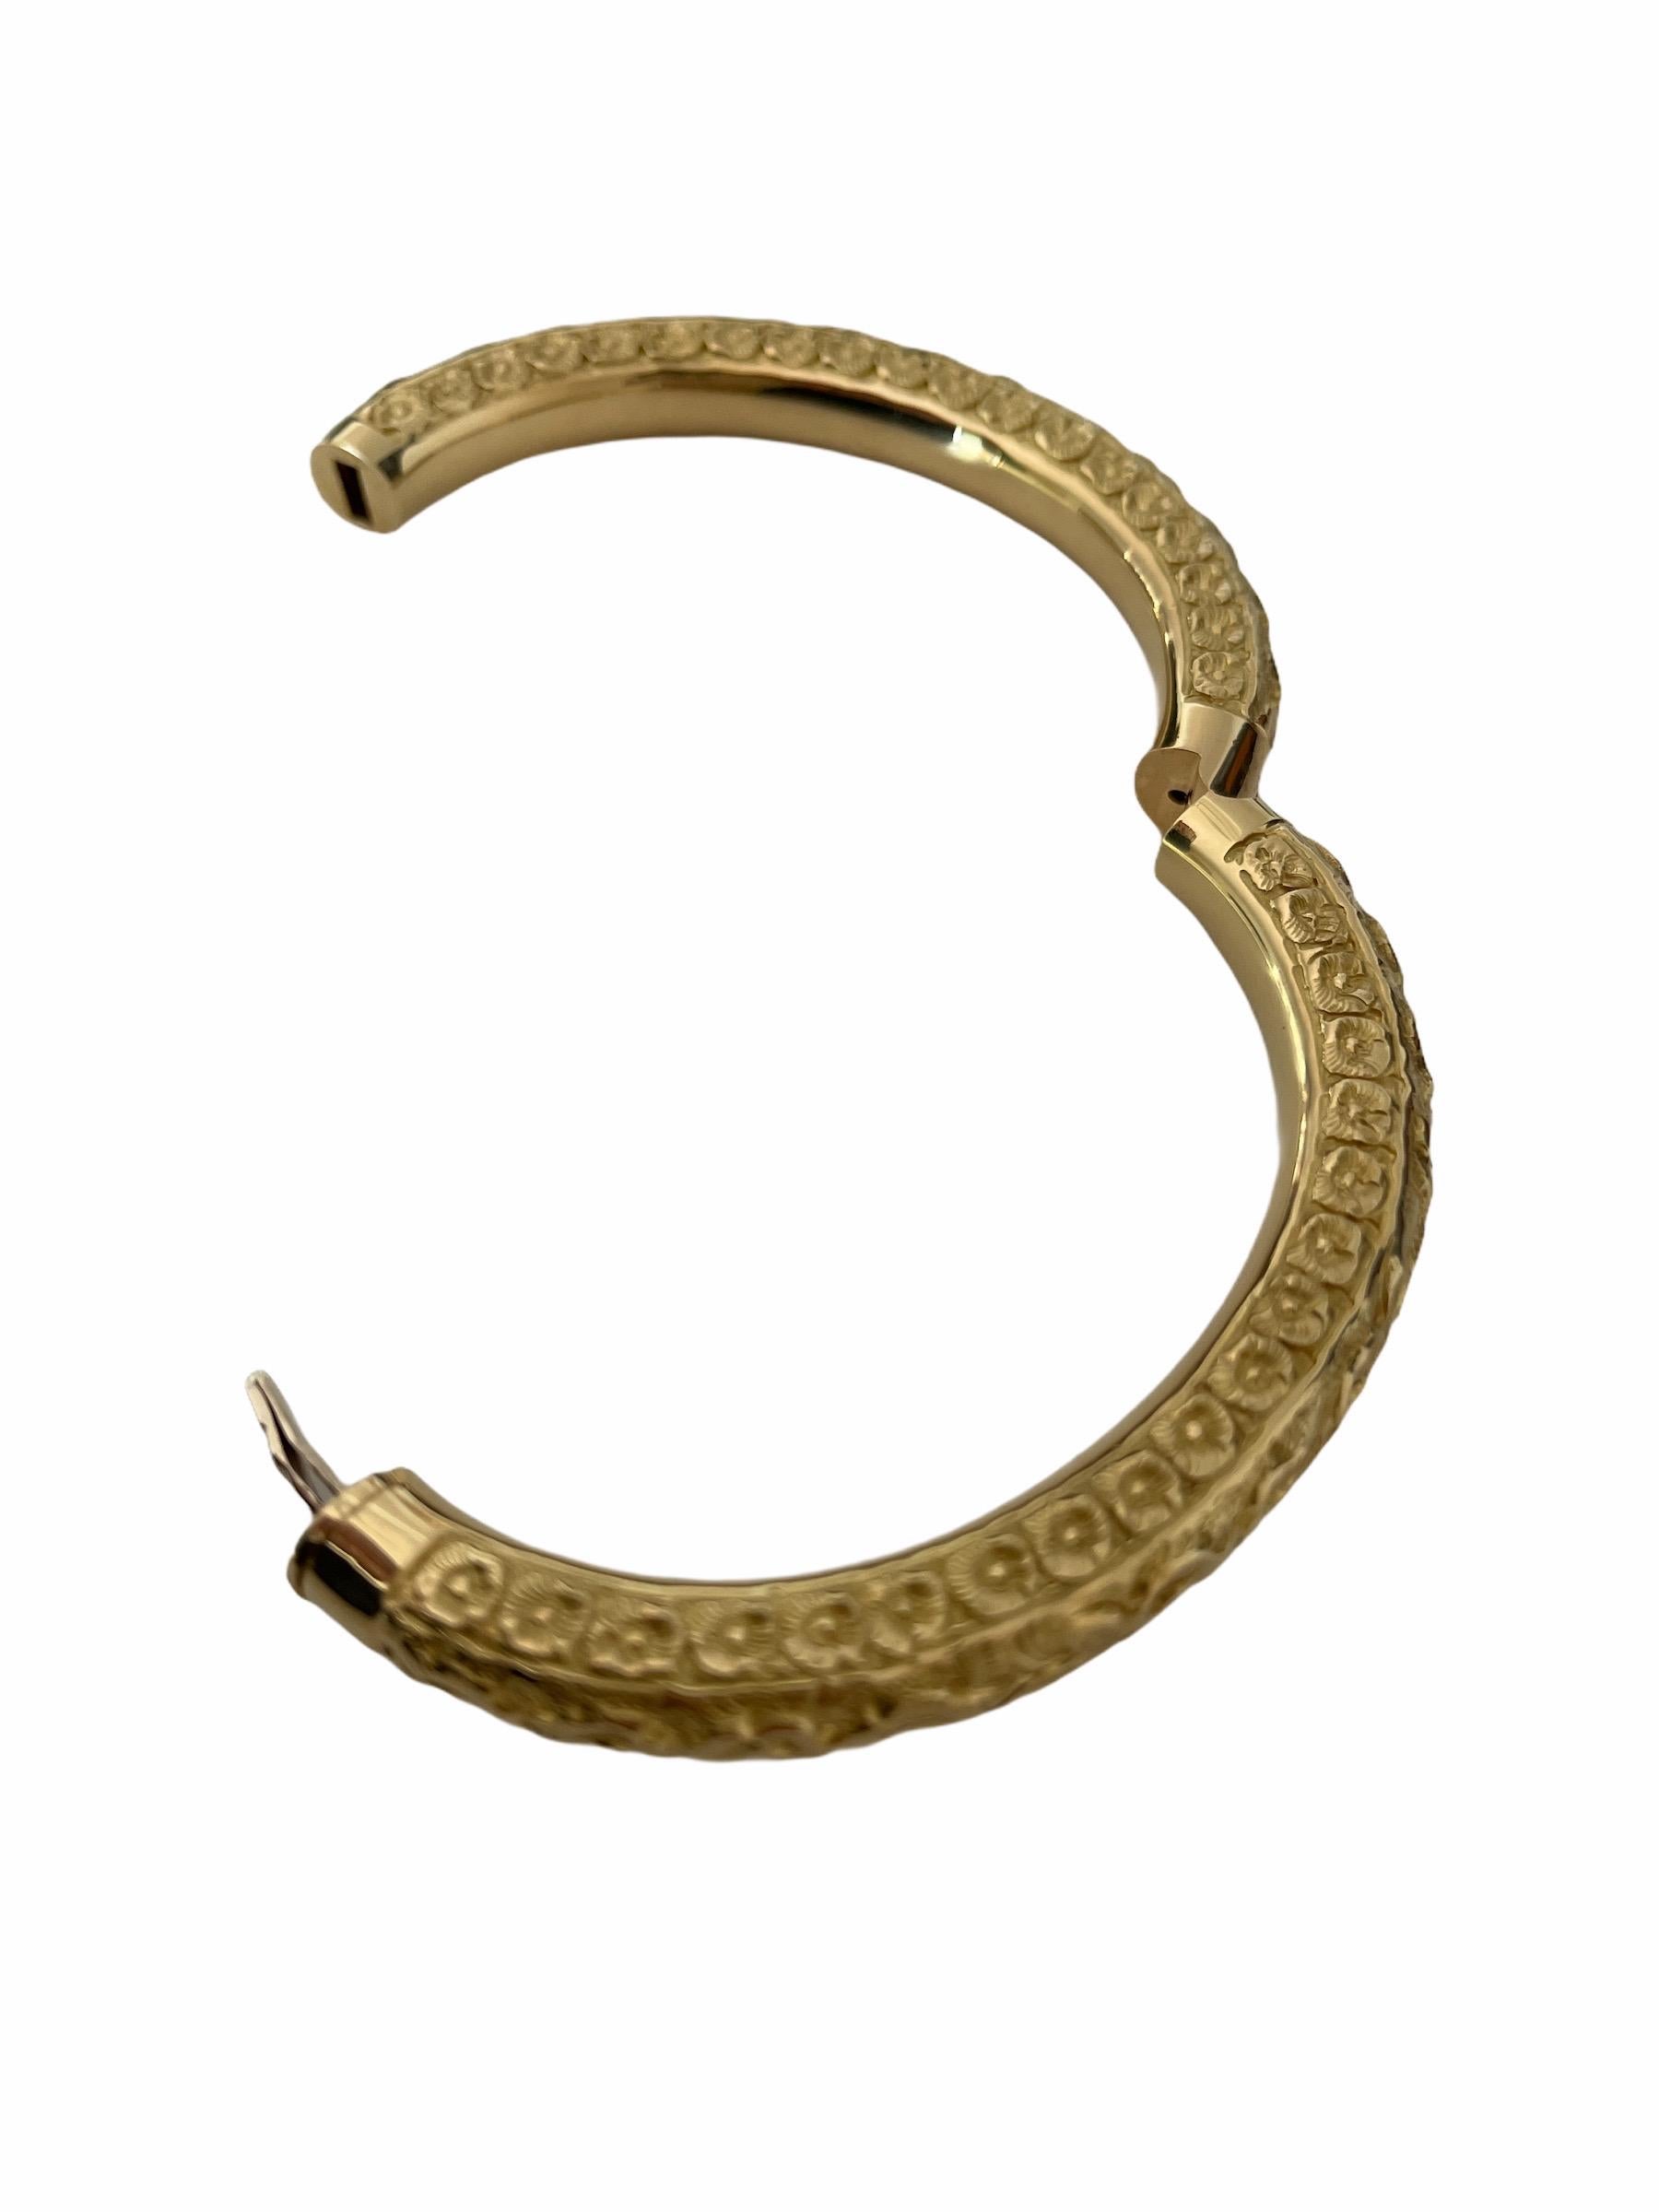 Gorgeous bracelet molded to the art to better adhere to the oval anatomy of the woman’s weist, embellished byhand chiseling. This bracelet is part of the Roserosse Collection.
The chiseling is an almost disapprring ancient art of fully manual